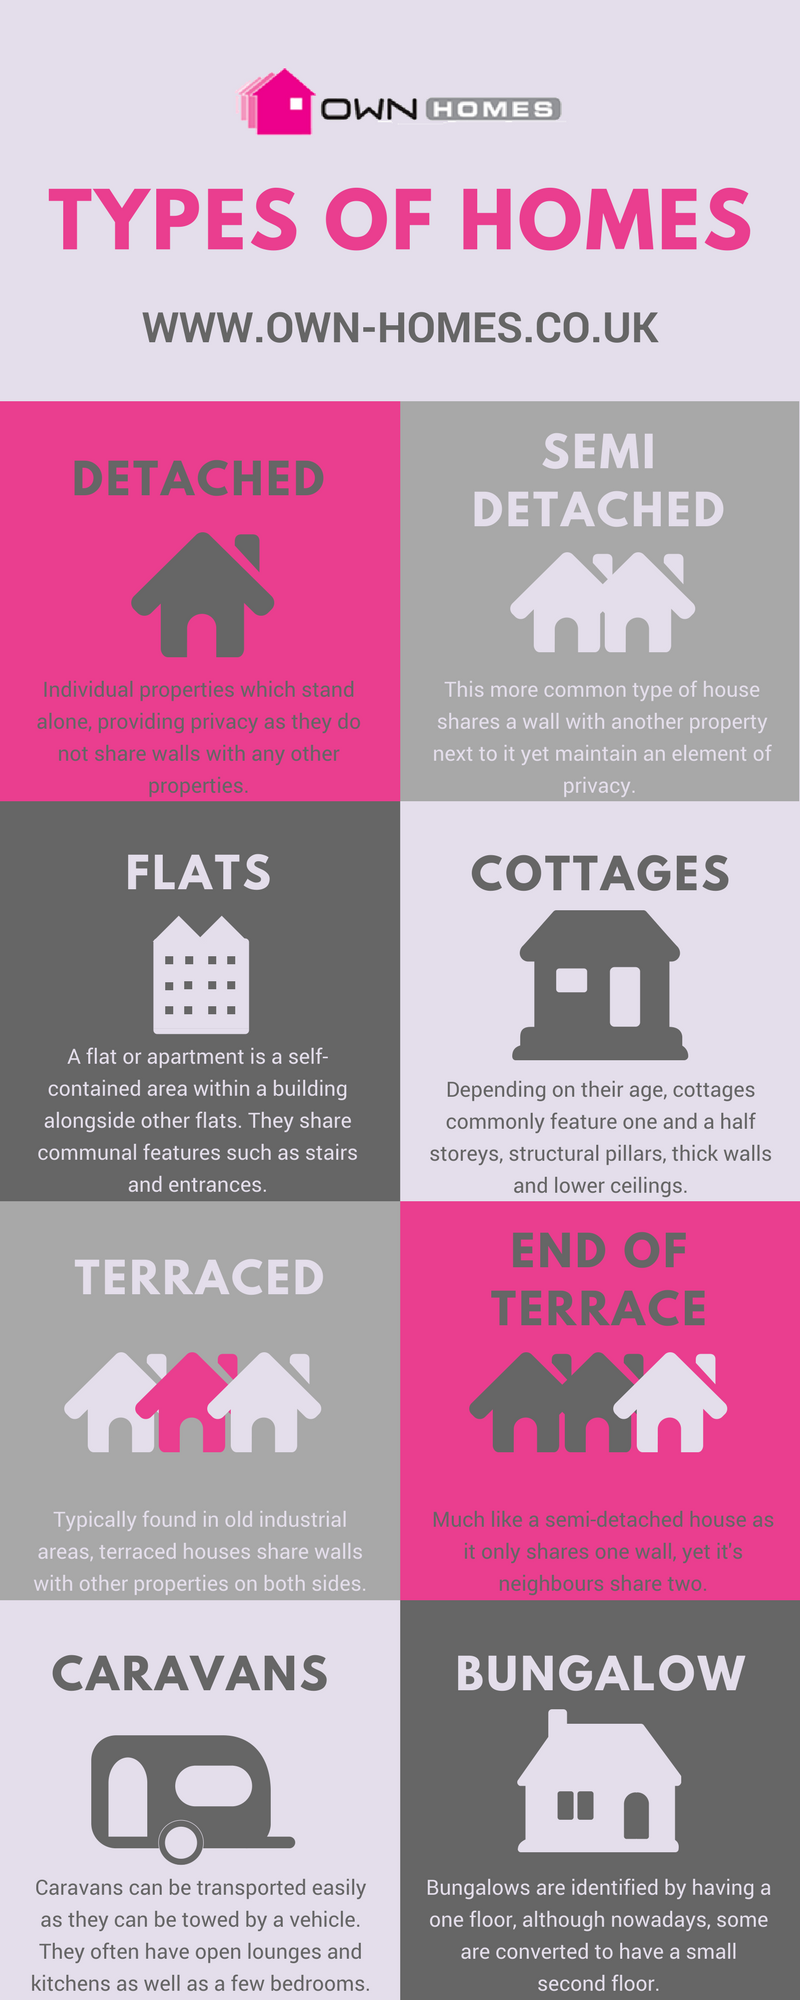 types-of-homes-infographic-plaza